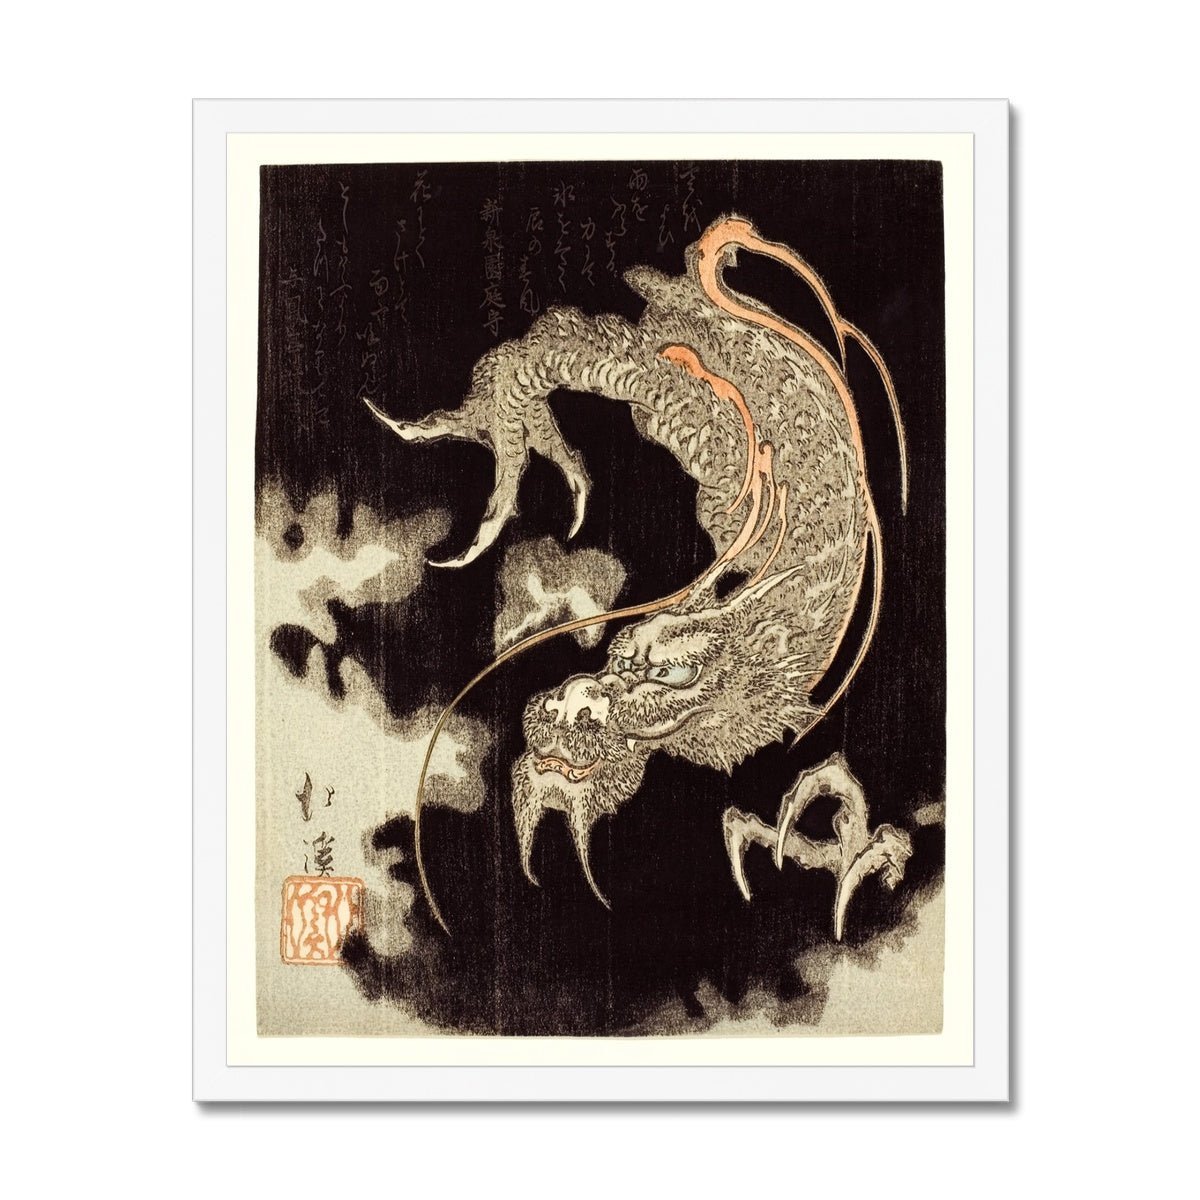 Framed Print 16"x20" / White Frame Framed Storm Dragon Against a Black Sky with Clouds and Poems, Totoya Hokkei Japanese Framed Print